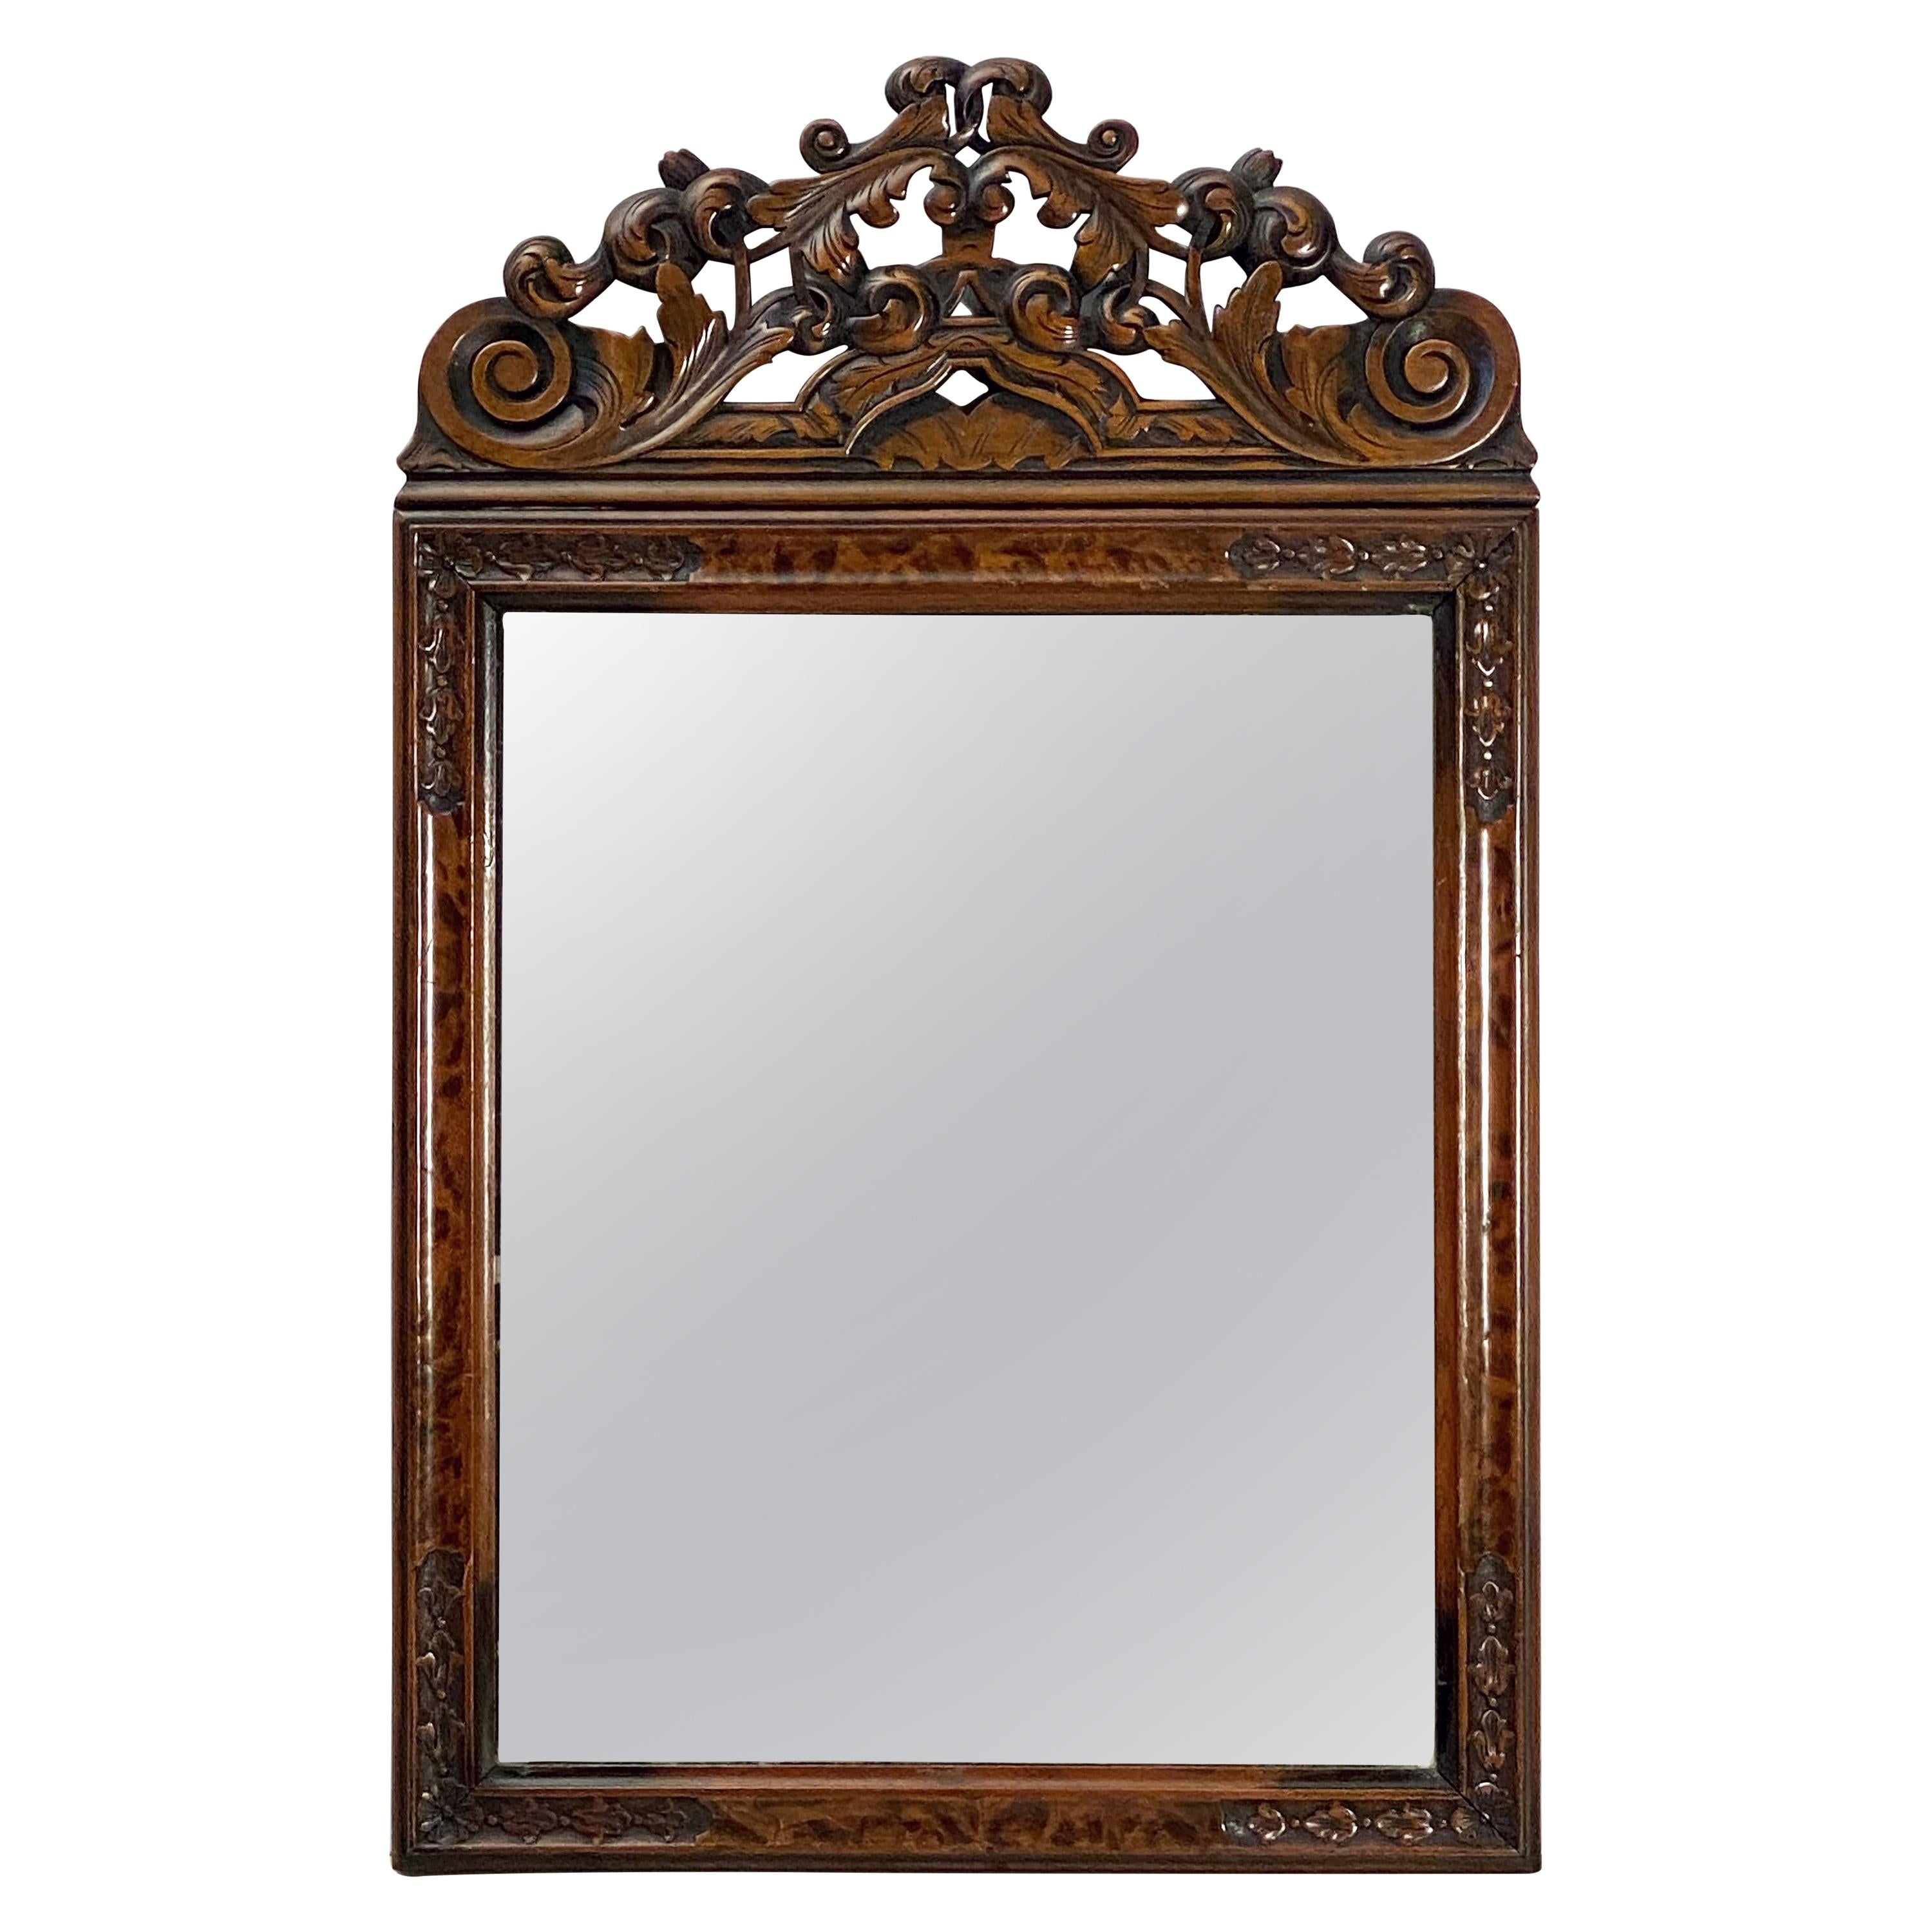 English Rectangular Mirror in Carved Frame of Walnut (H 33 3/8 x W 21) For Sale